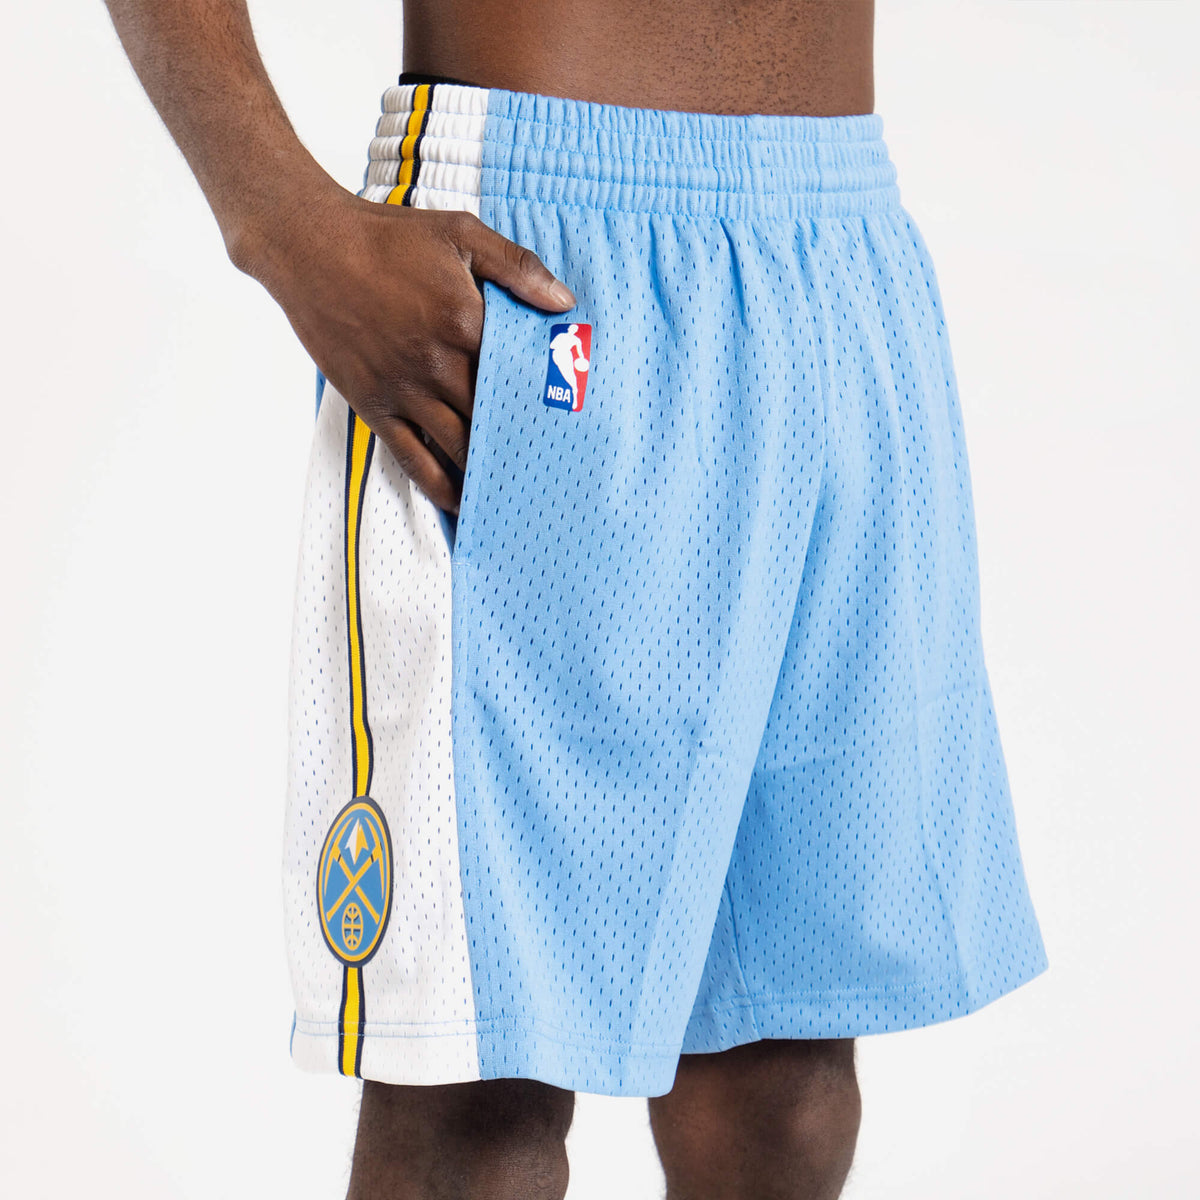 Denver Nuggets Basketball Shorts – Jerseys and Sneakers